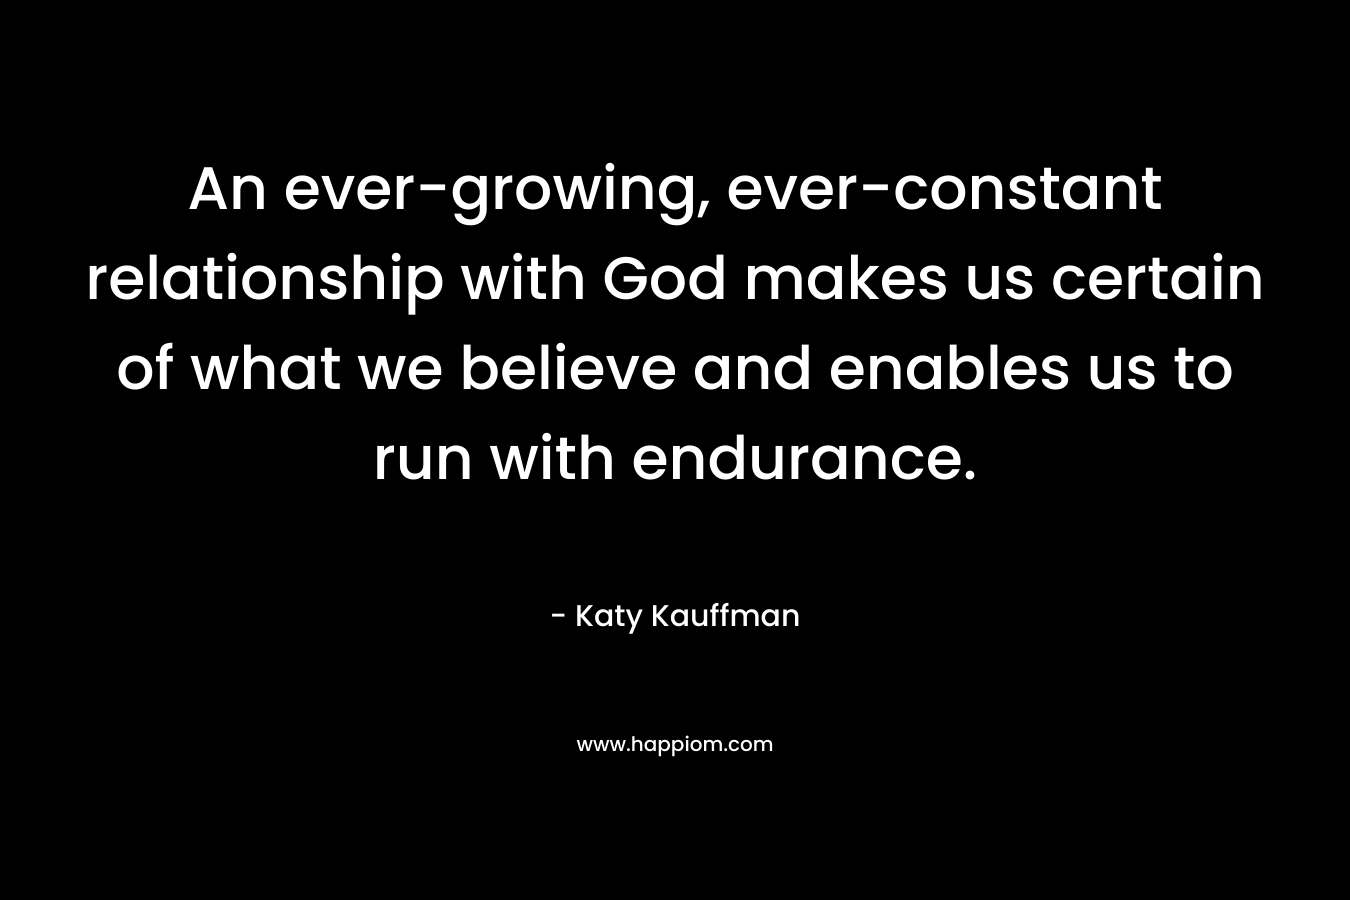 An ever-growing, ever-constant relationship with God makes us certain of what we believe and enables us to run with endurance.